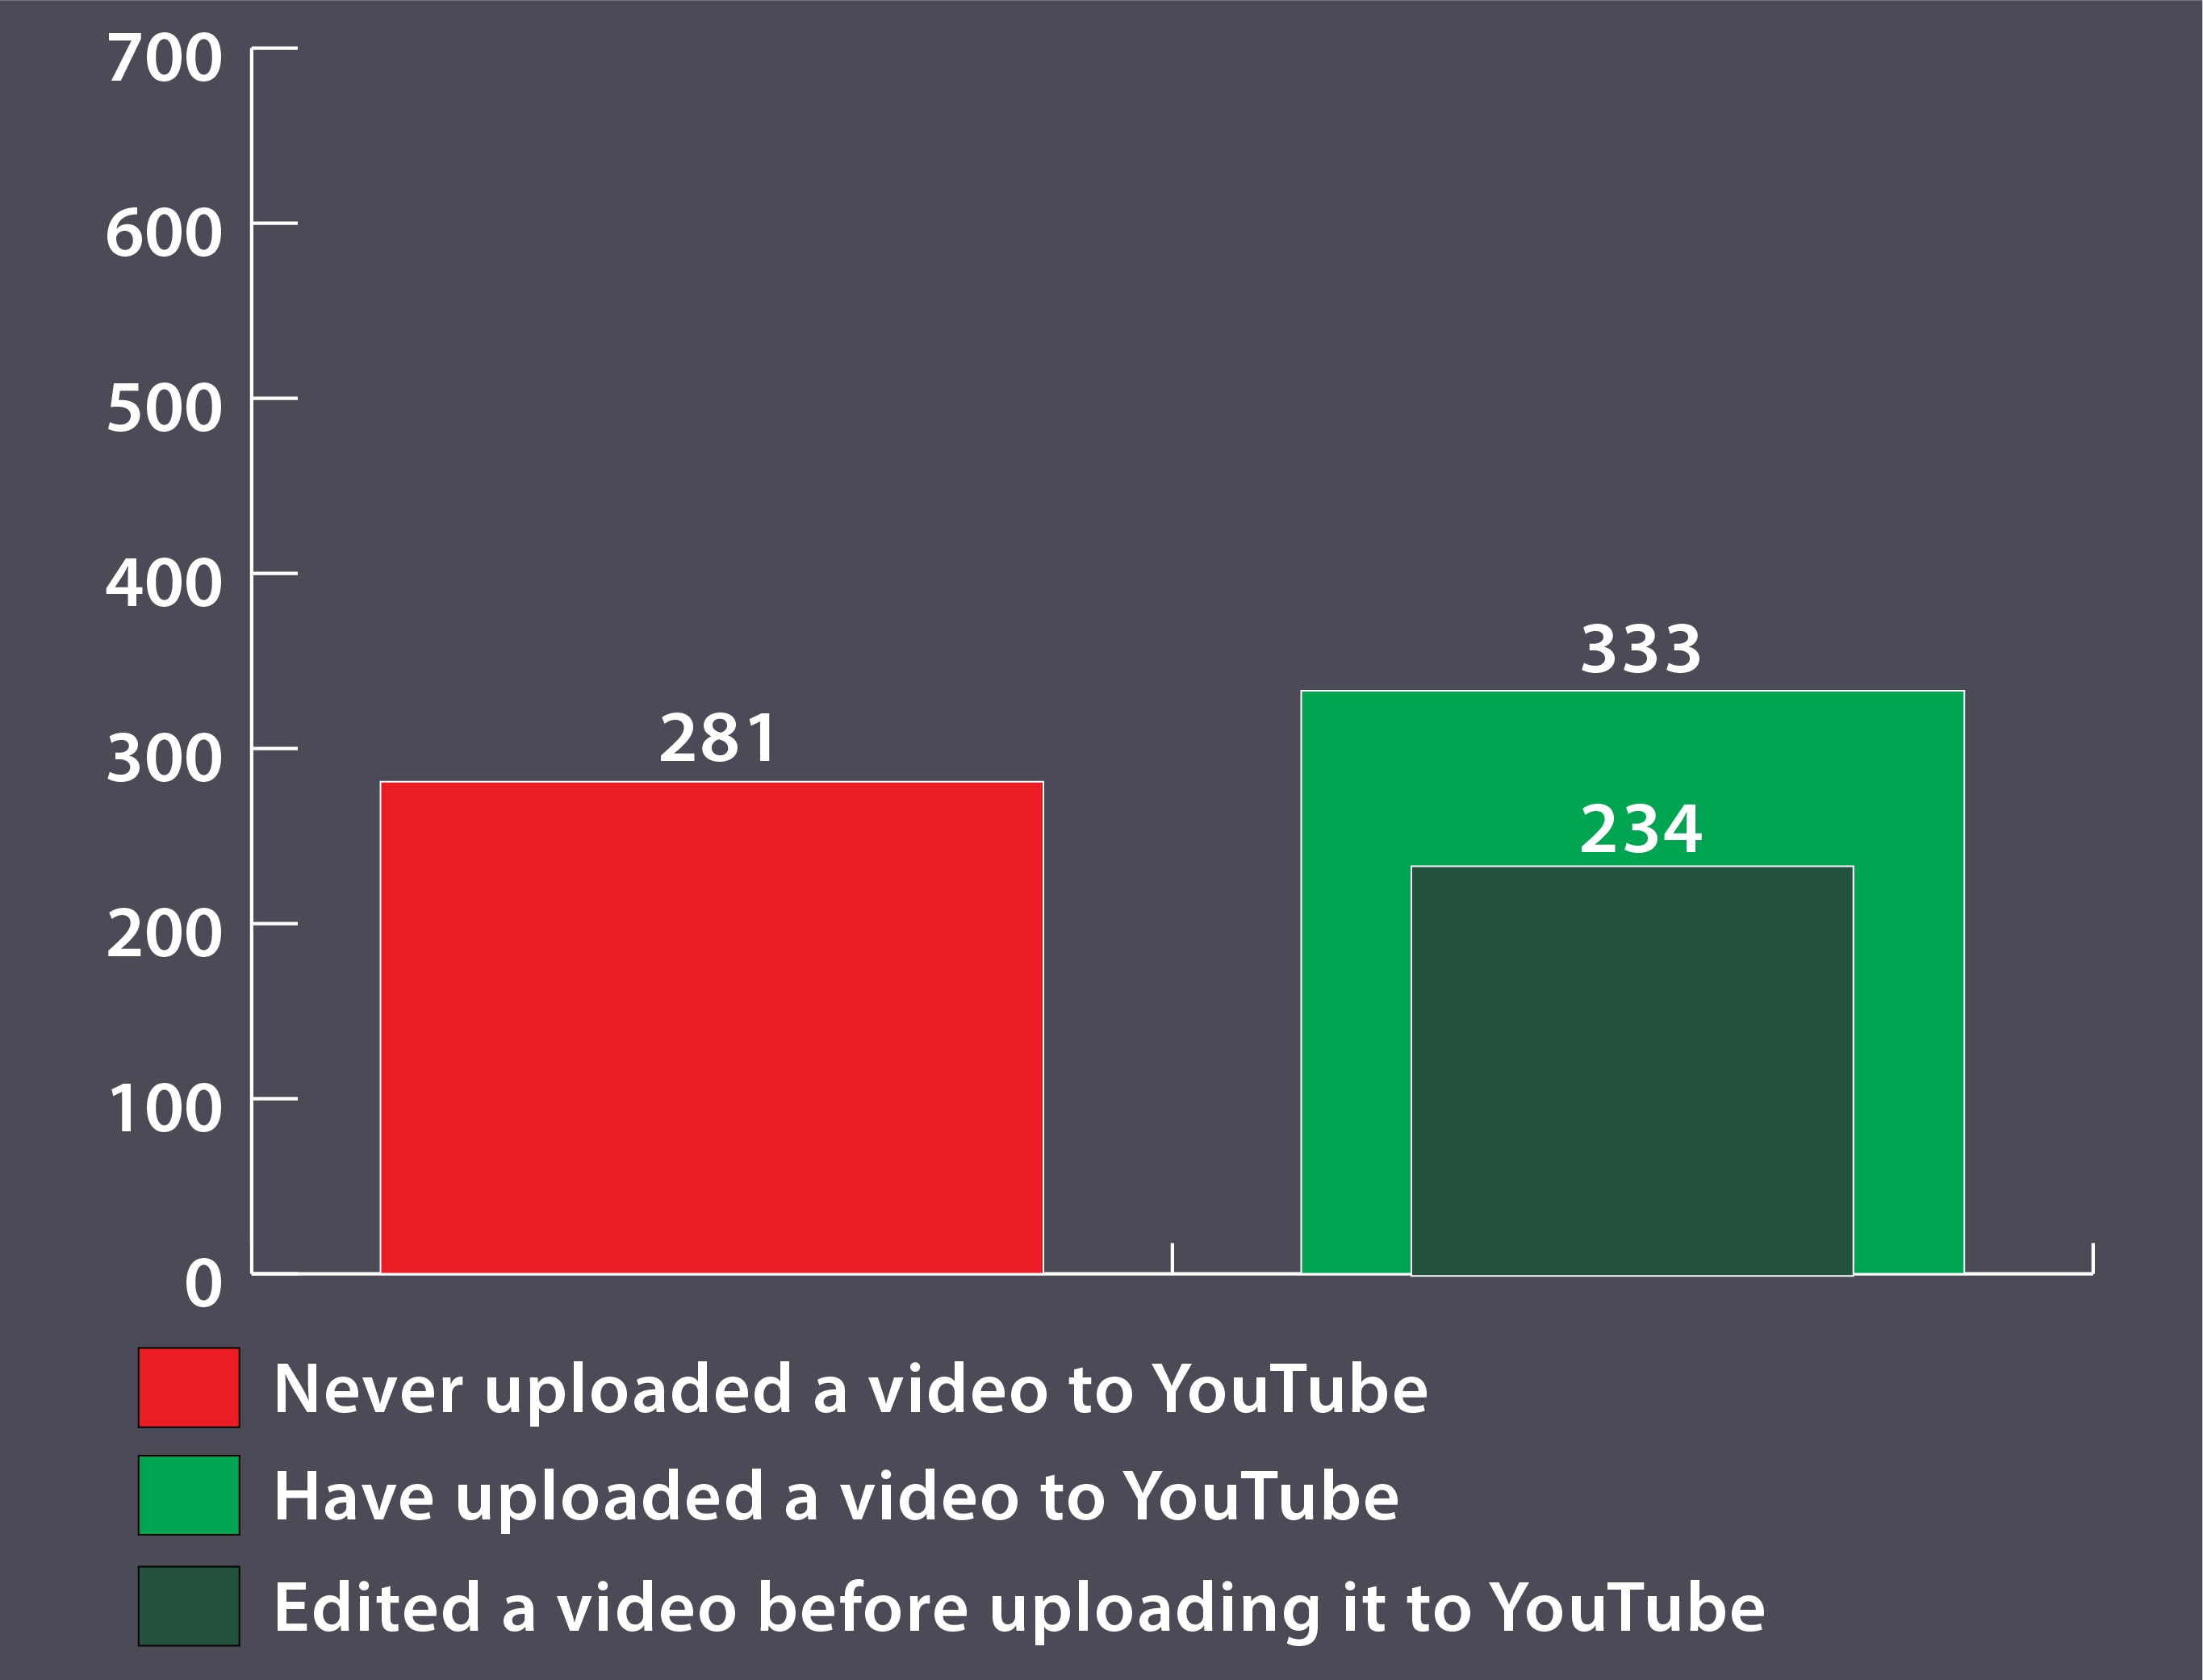 Graph show number of participants who uploaded a video to YouTube